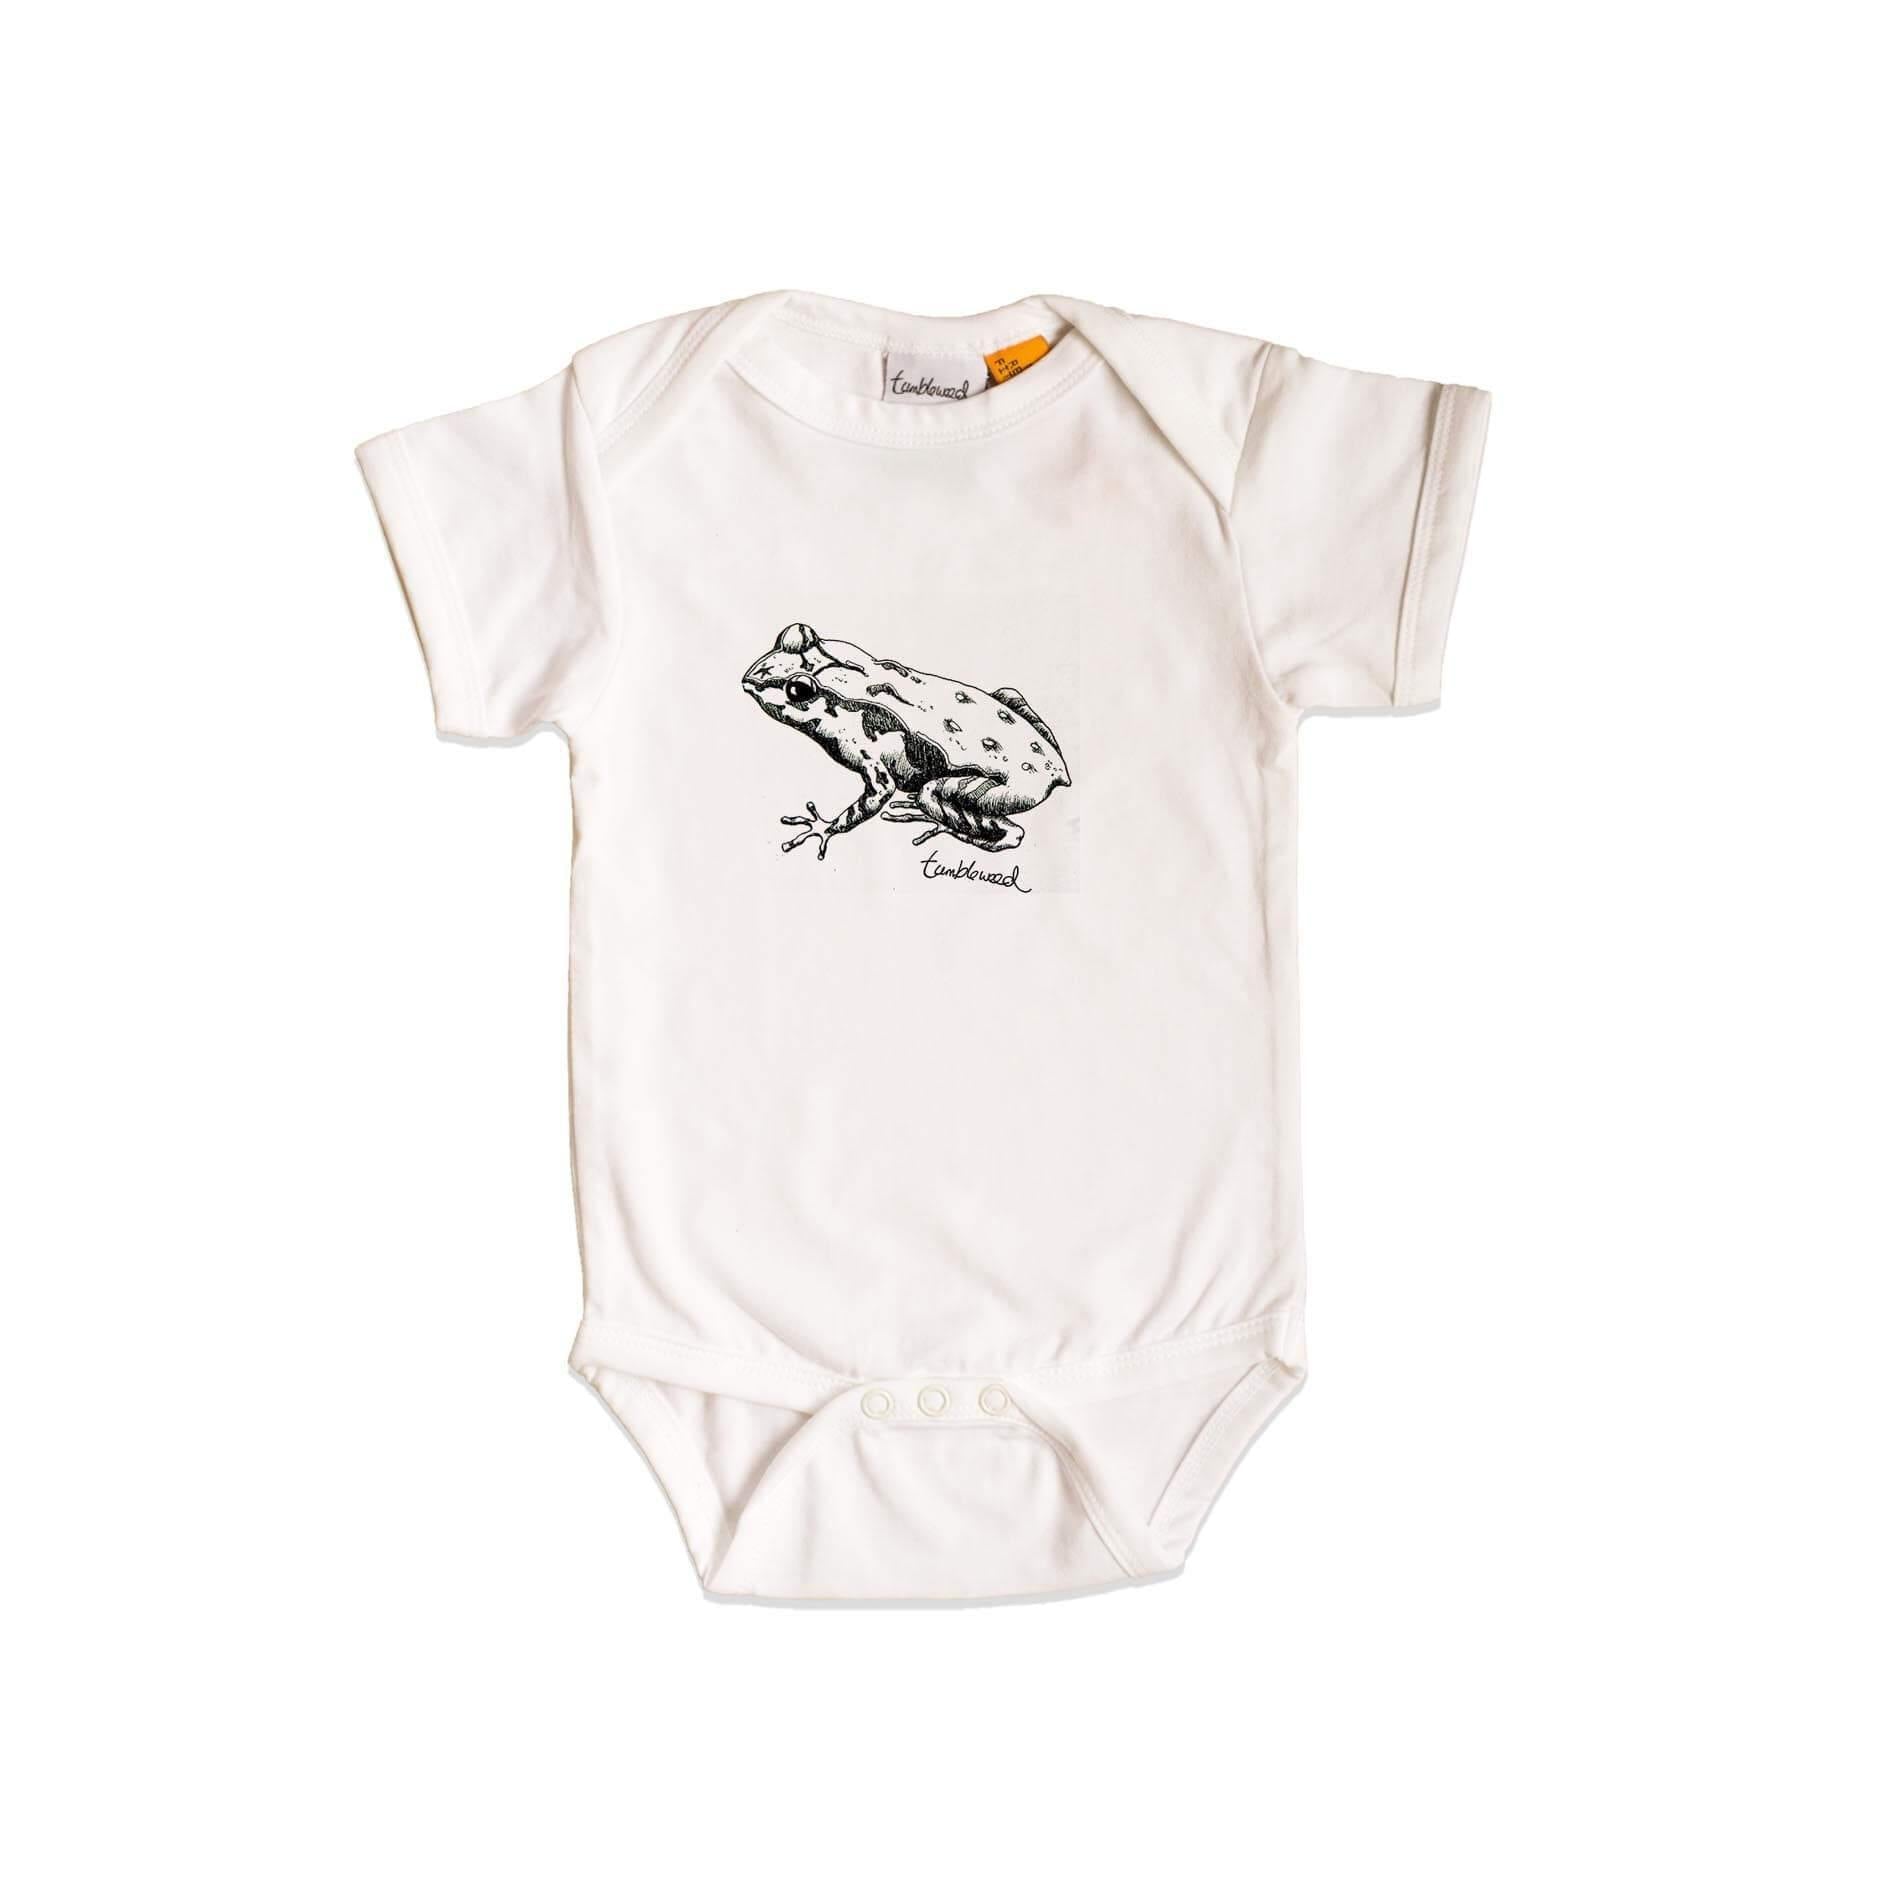 Short sleeved, white, organic cotton, baby onesie featuring a screen printed Archey's Frog design.